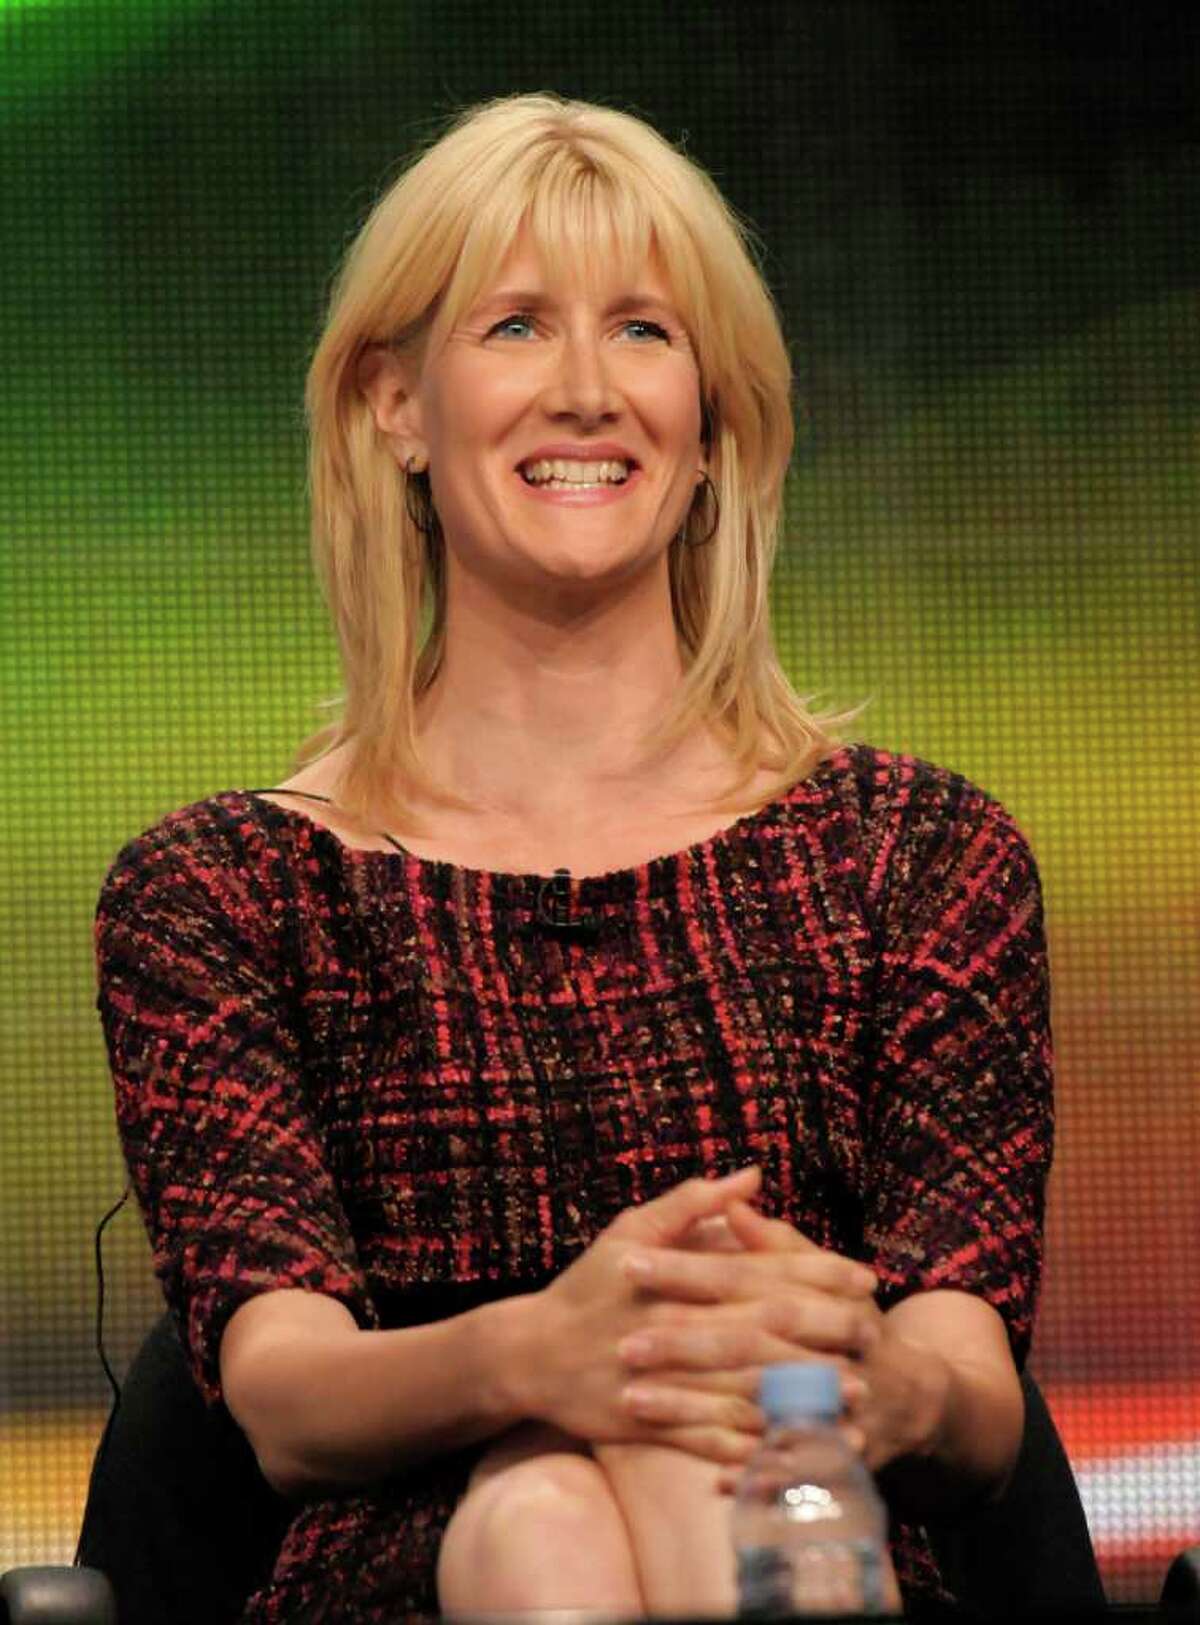 Laura Dern stars in the upcoming series "Enlightened" on HBO.